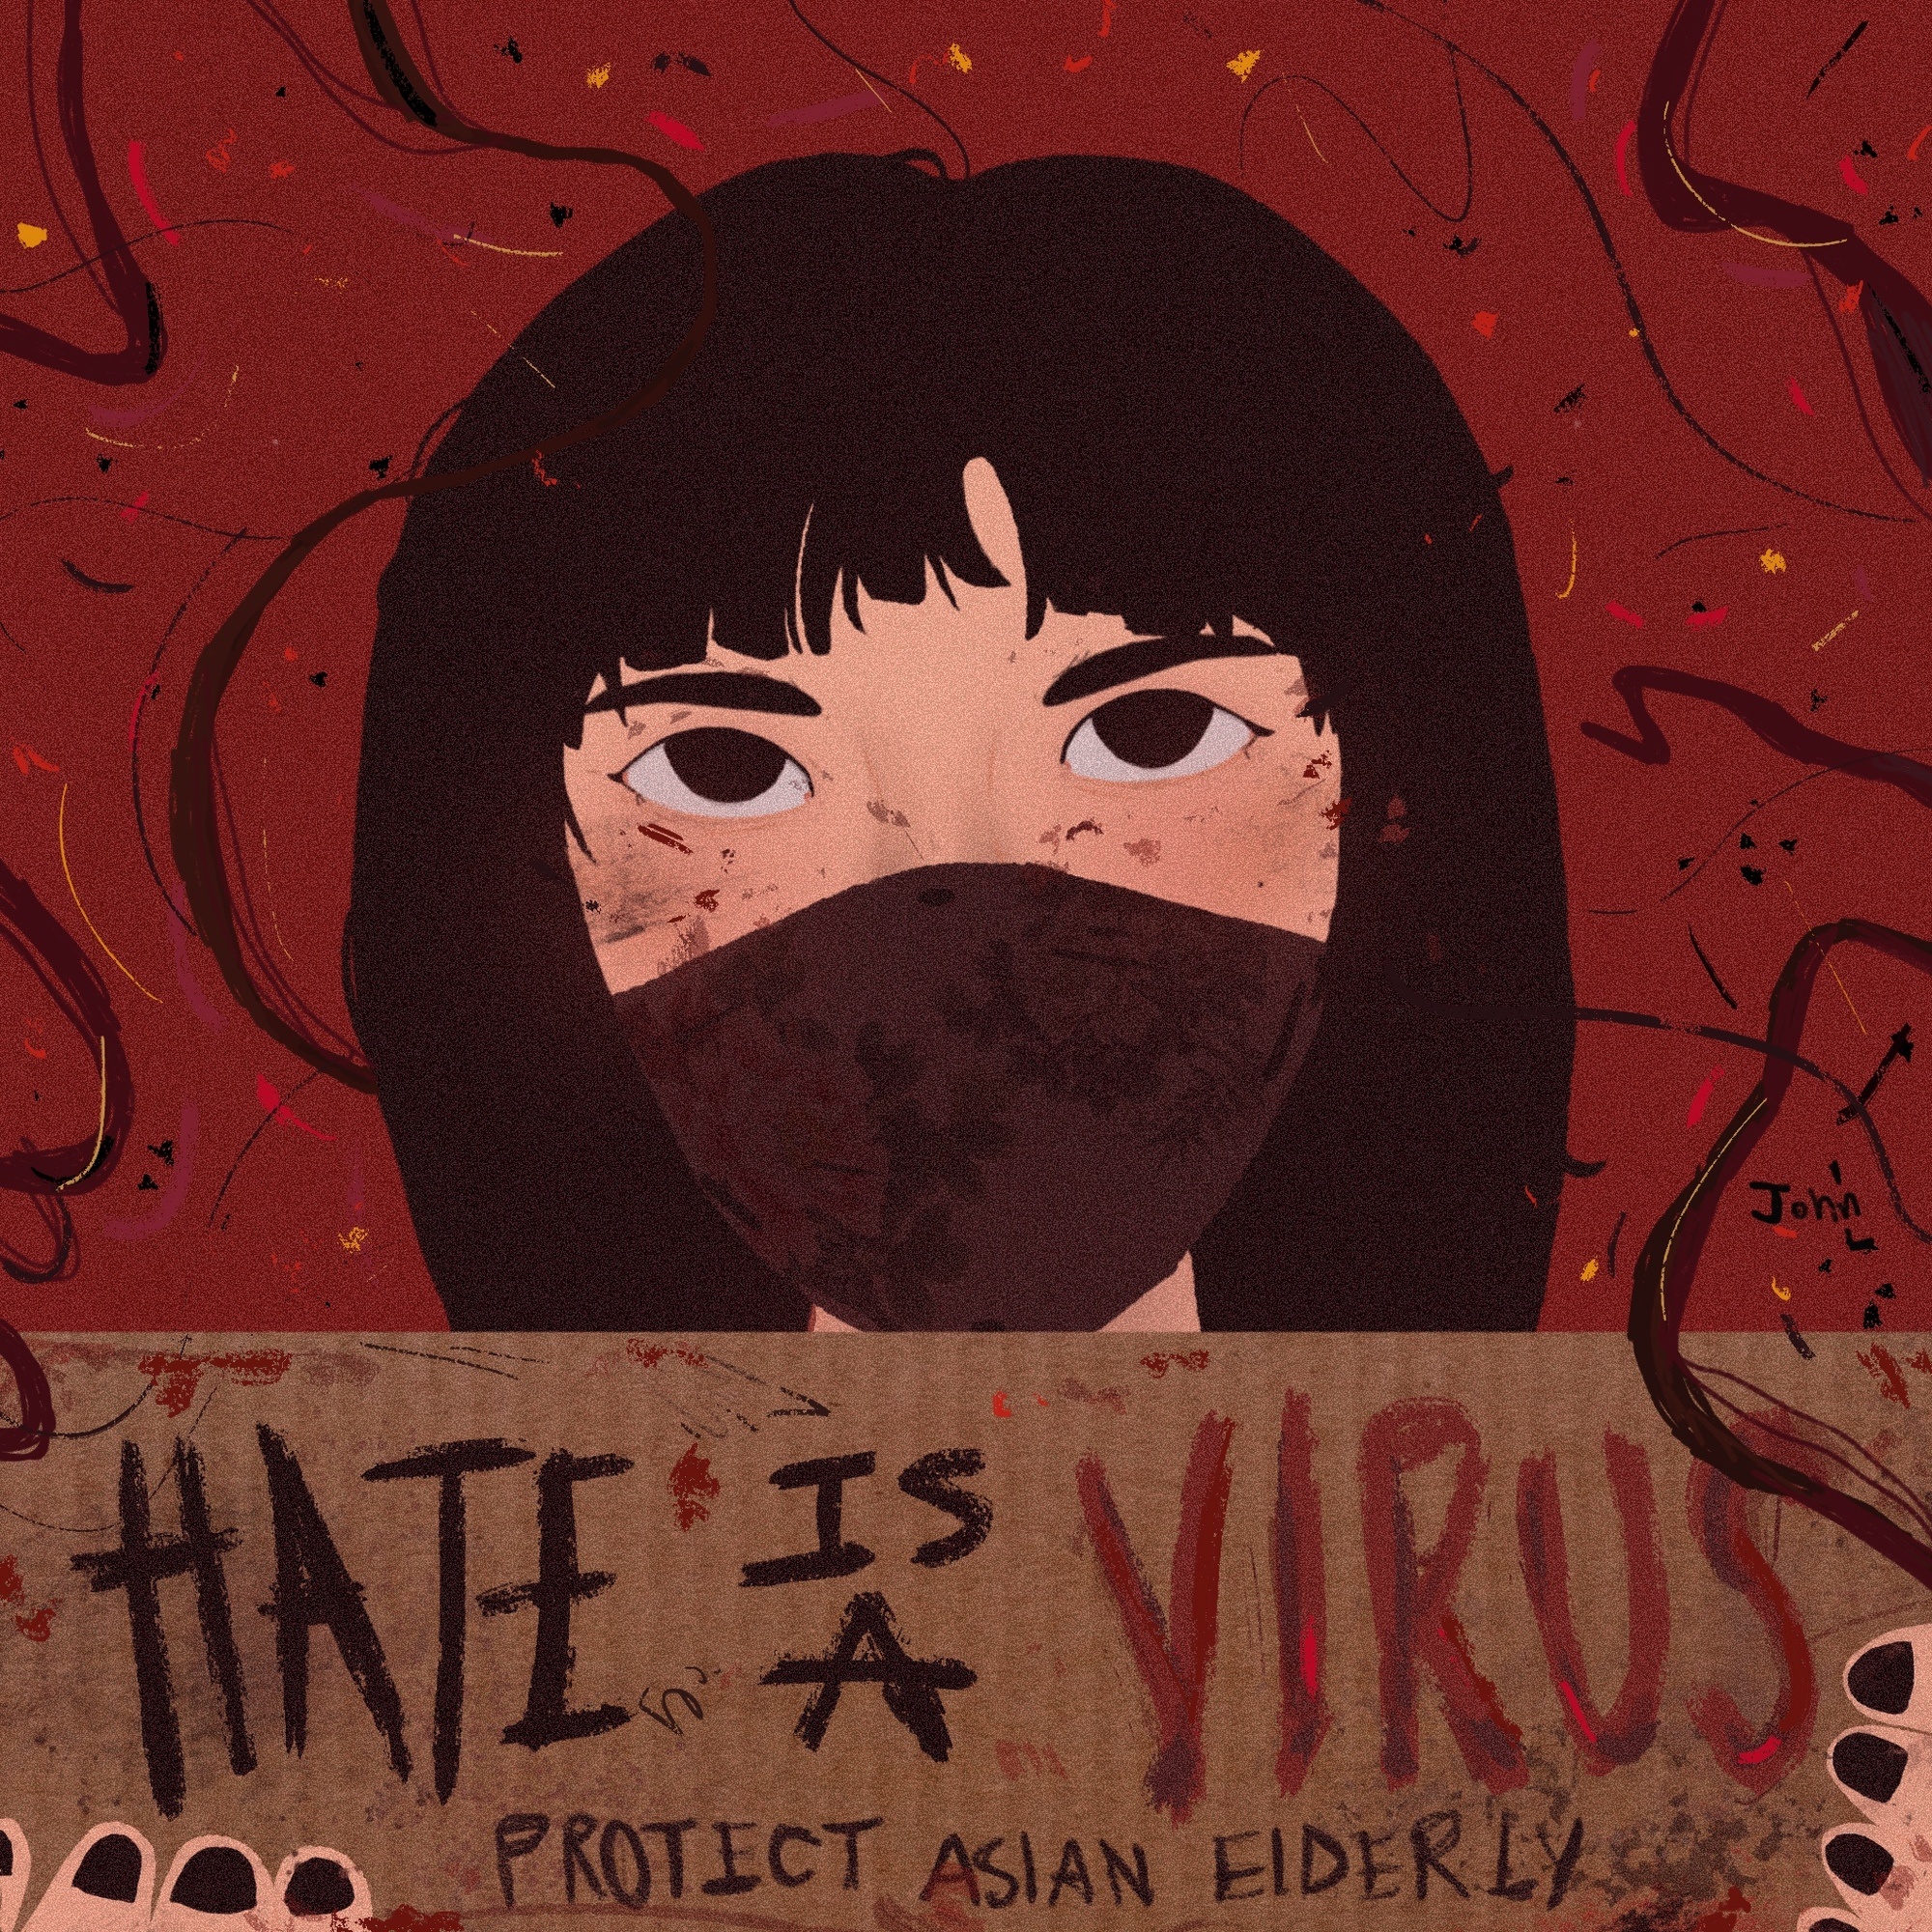 hate is a virus together we rise